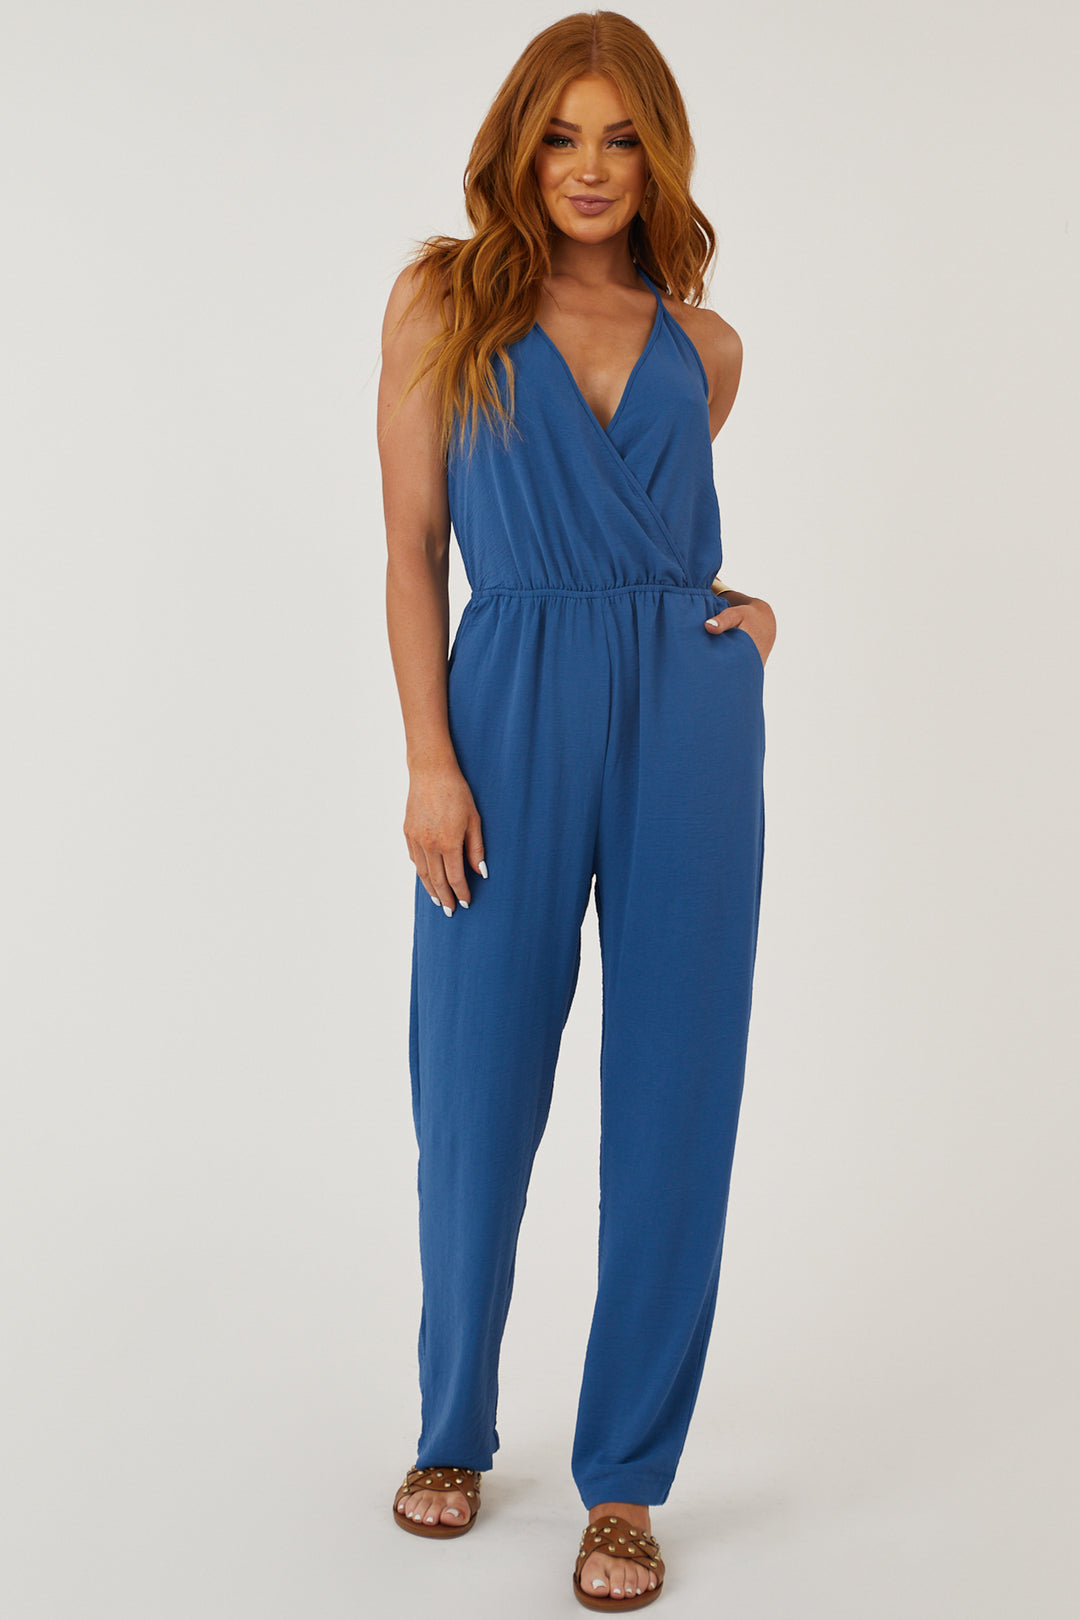 Steel Blue Open Back Jumpsuit with V Neck Tie & Lime Lush